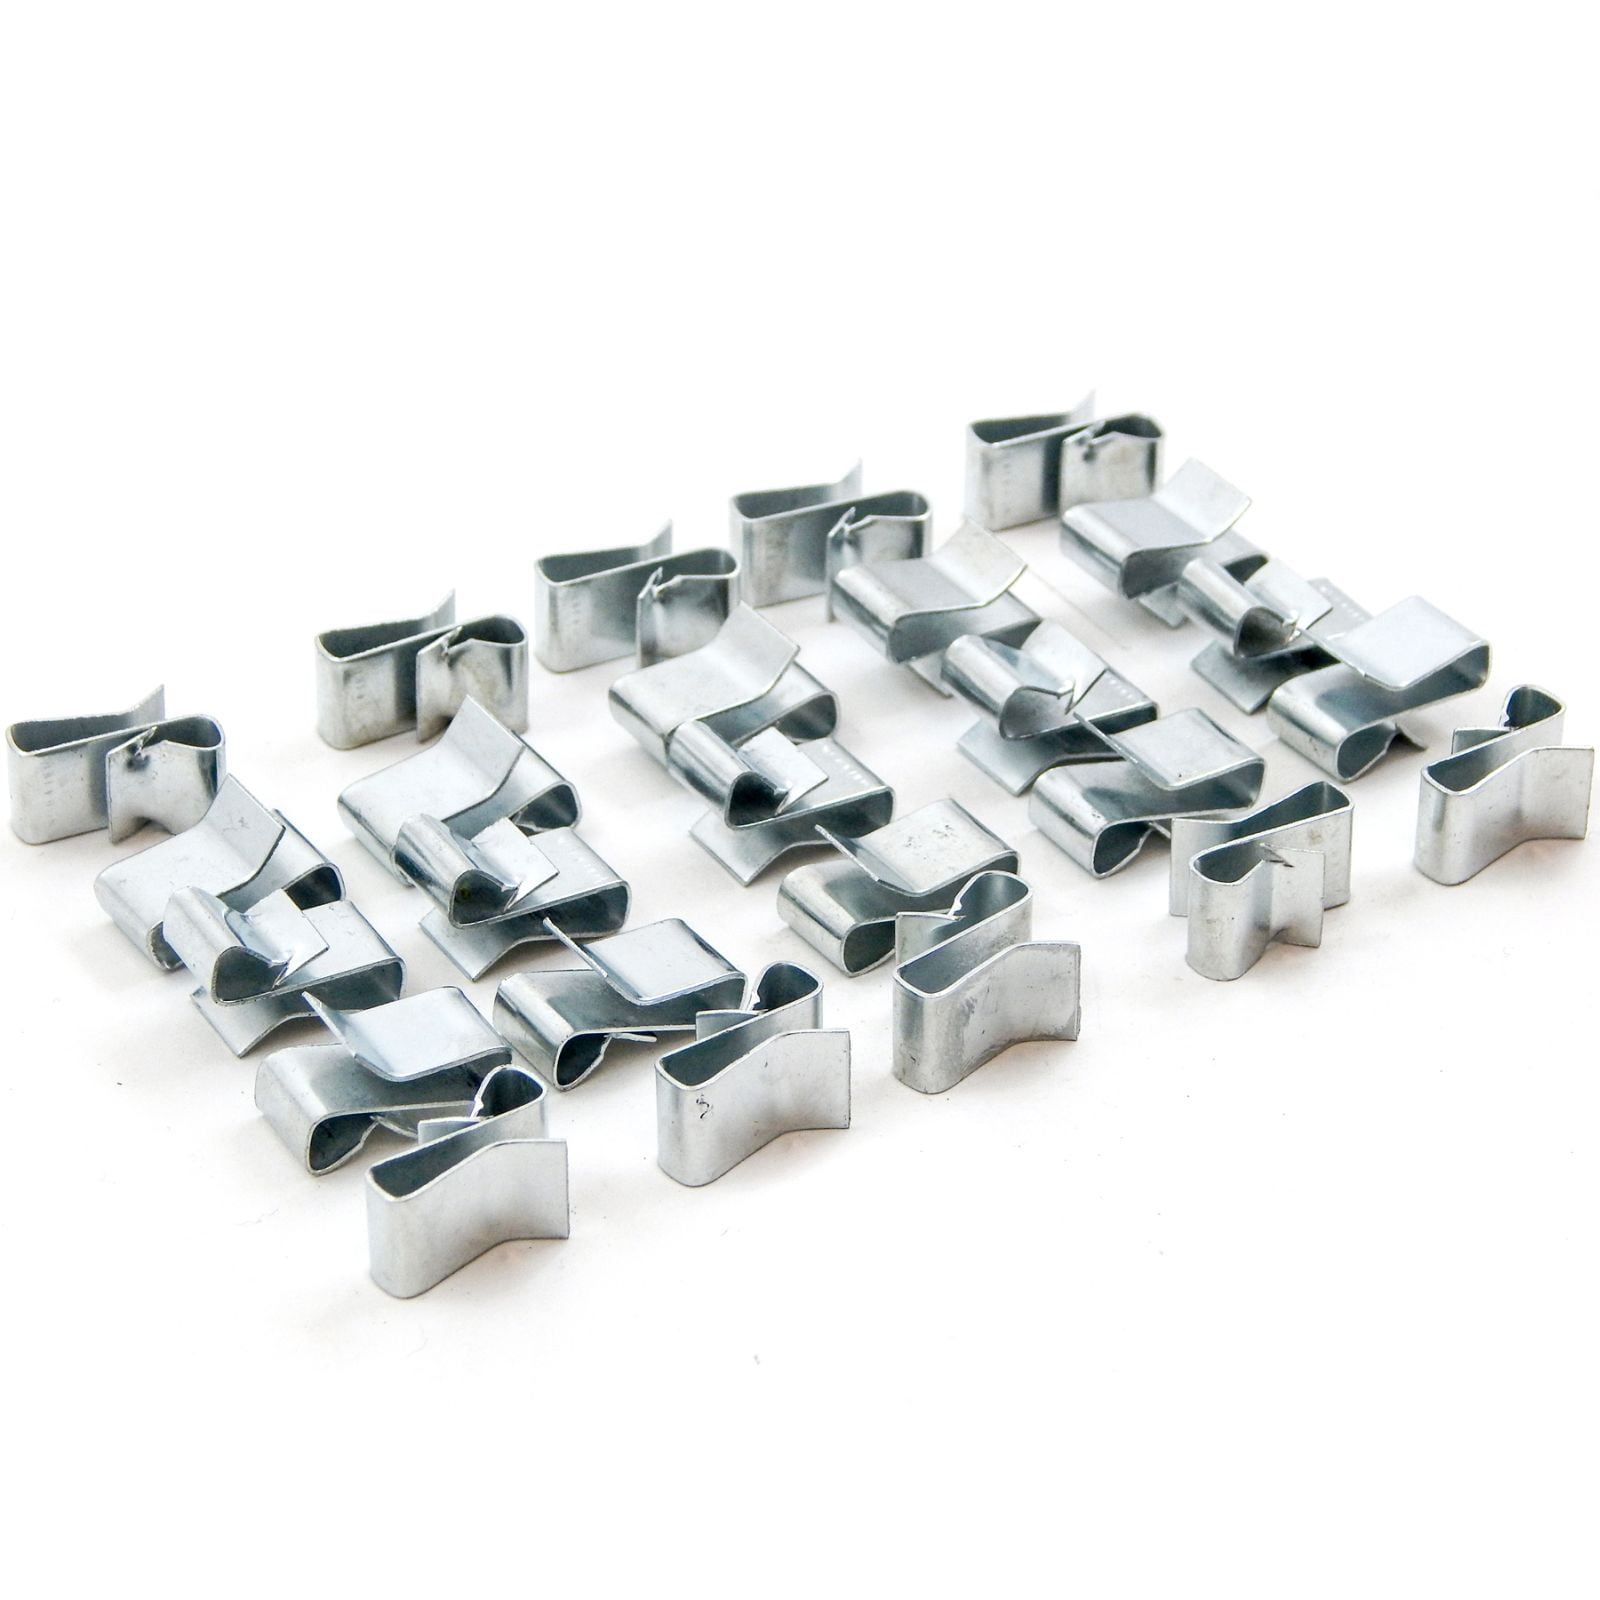 25 PCS Trailer Frame Wire Clips Metal Trailer Wire Clips for Wire Management 745051931353 